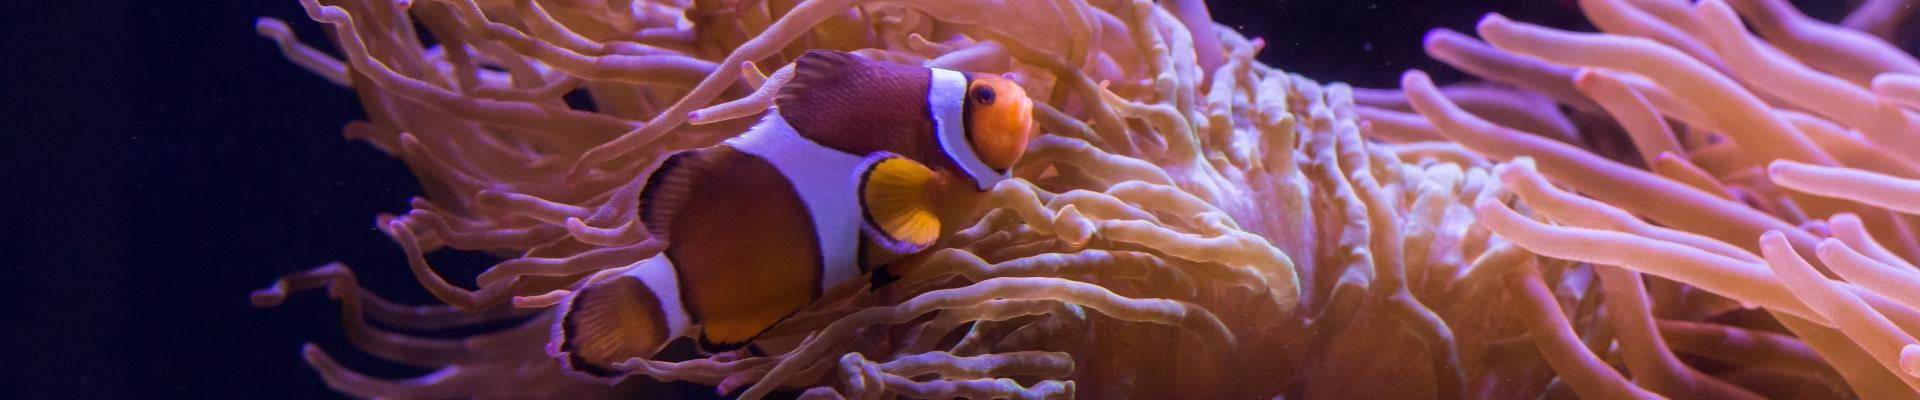 Clownfish in The Deep's Slime exhibit.